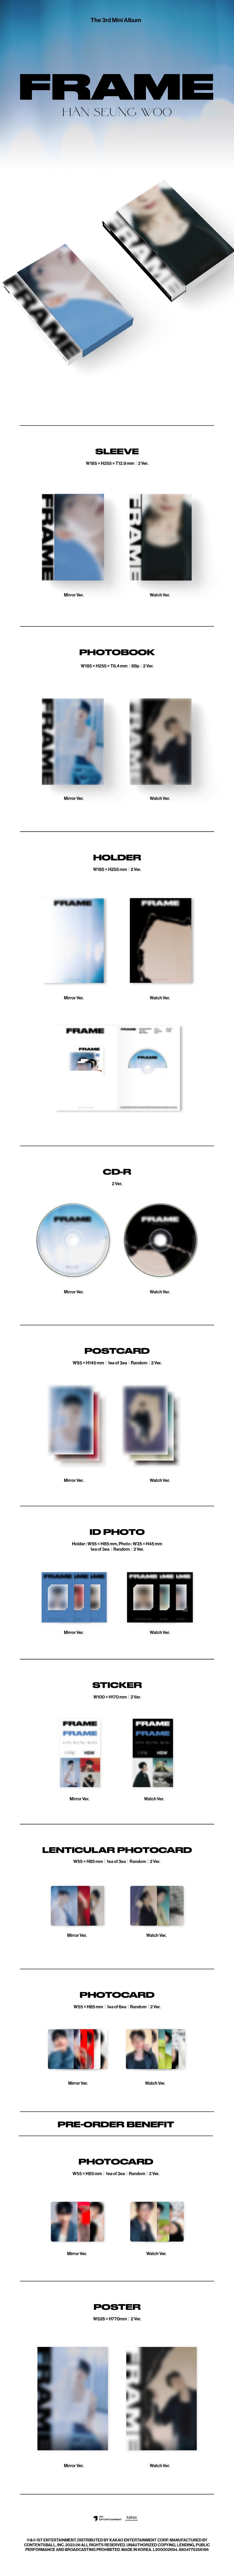 1 CD
1 Photo Book (88 pages)
1 Holder
1 Postcard (random out of 3 types)
1 ID Photo (random out of 3 types)
1 Sticker
1 Le...